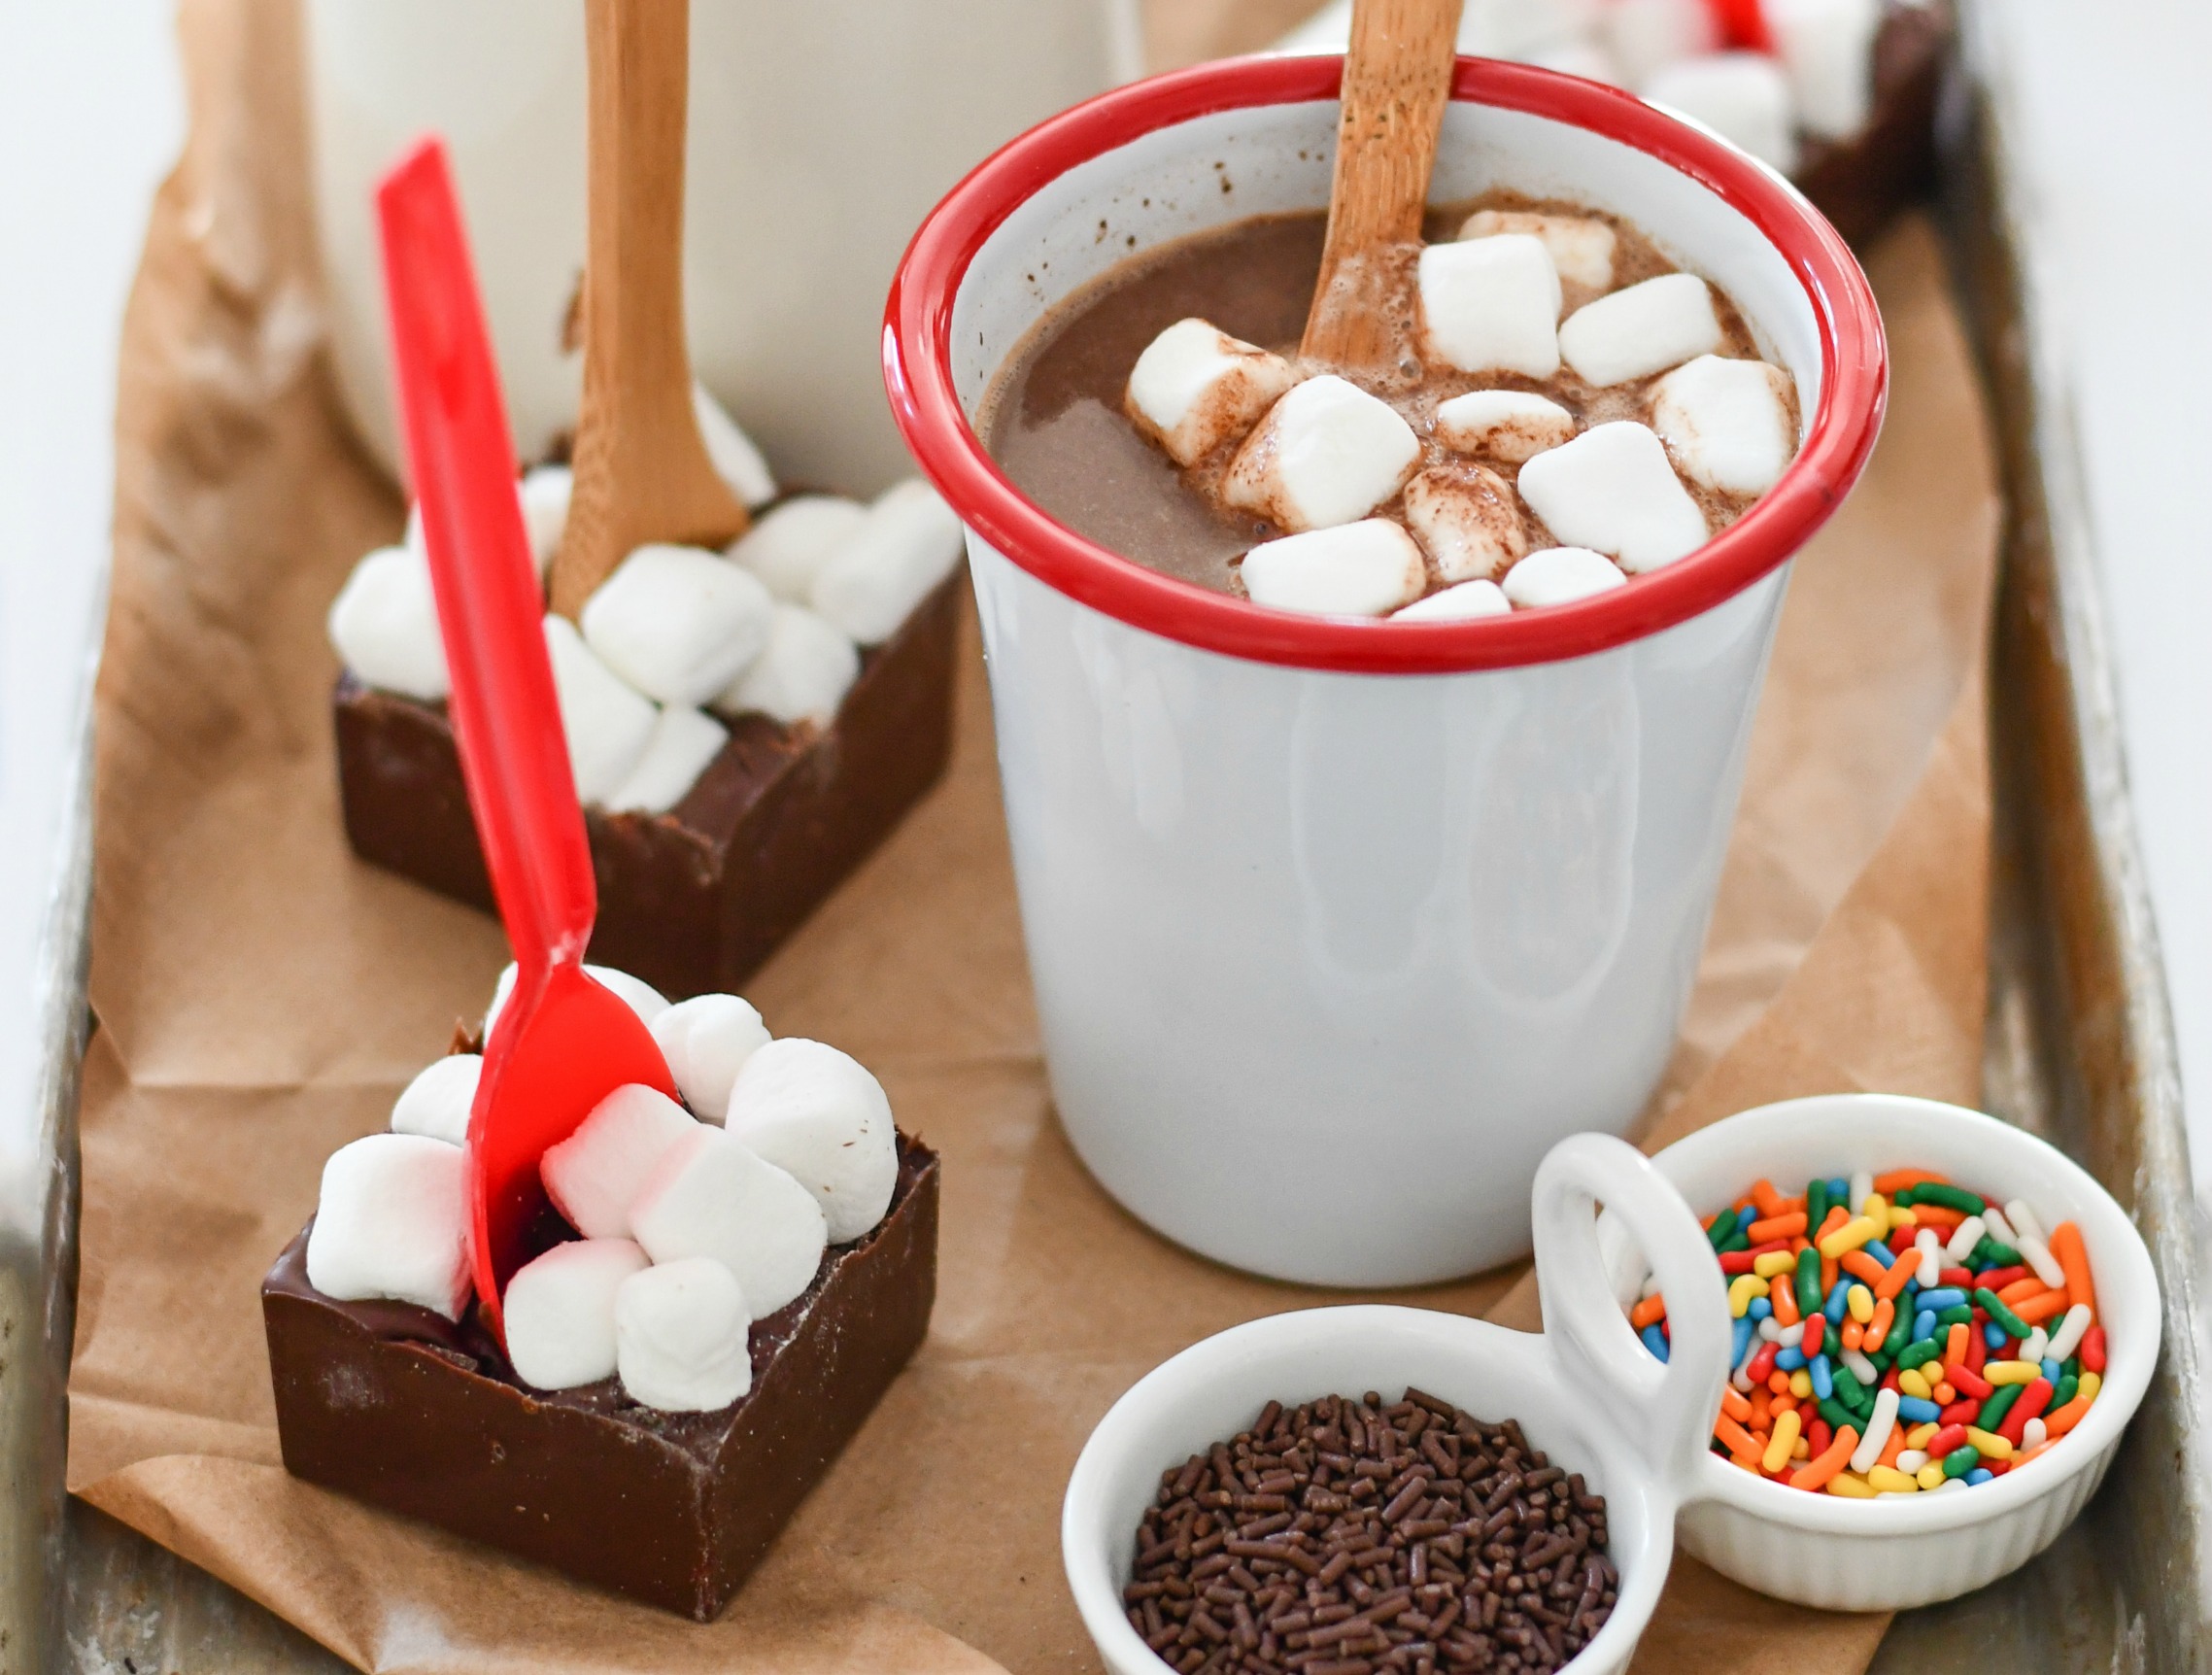 A cup of hot chocolate with marshmallows, surrounded by homemade hot chocolate spoons and sprinkles.